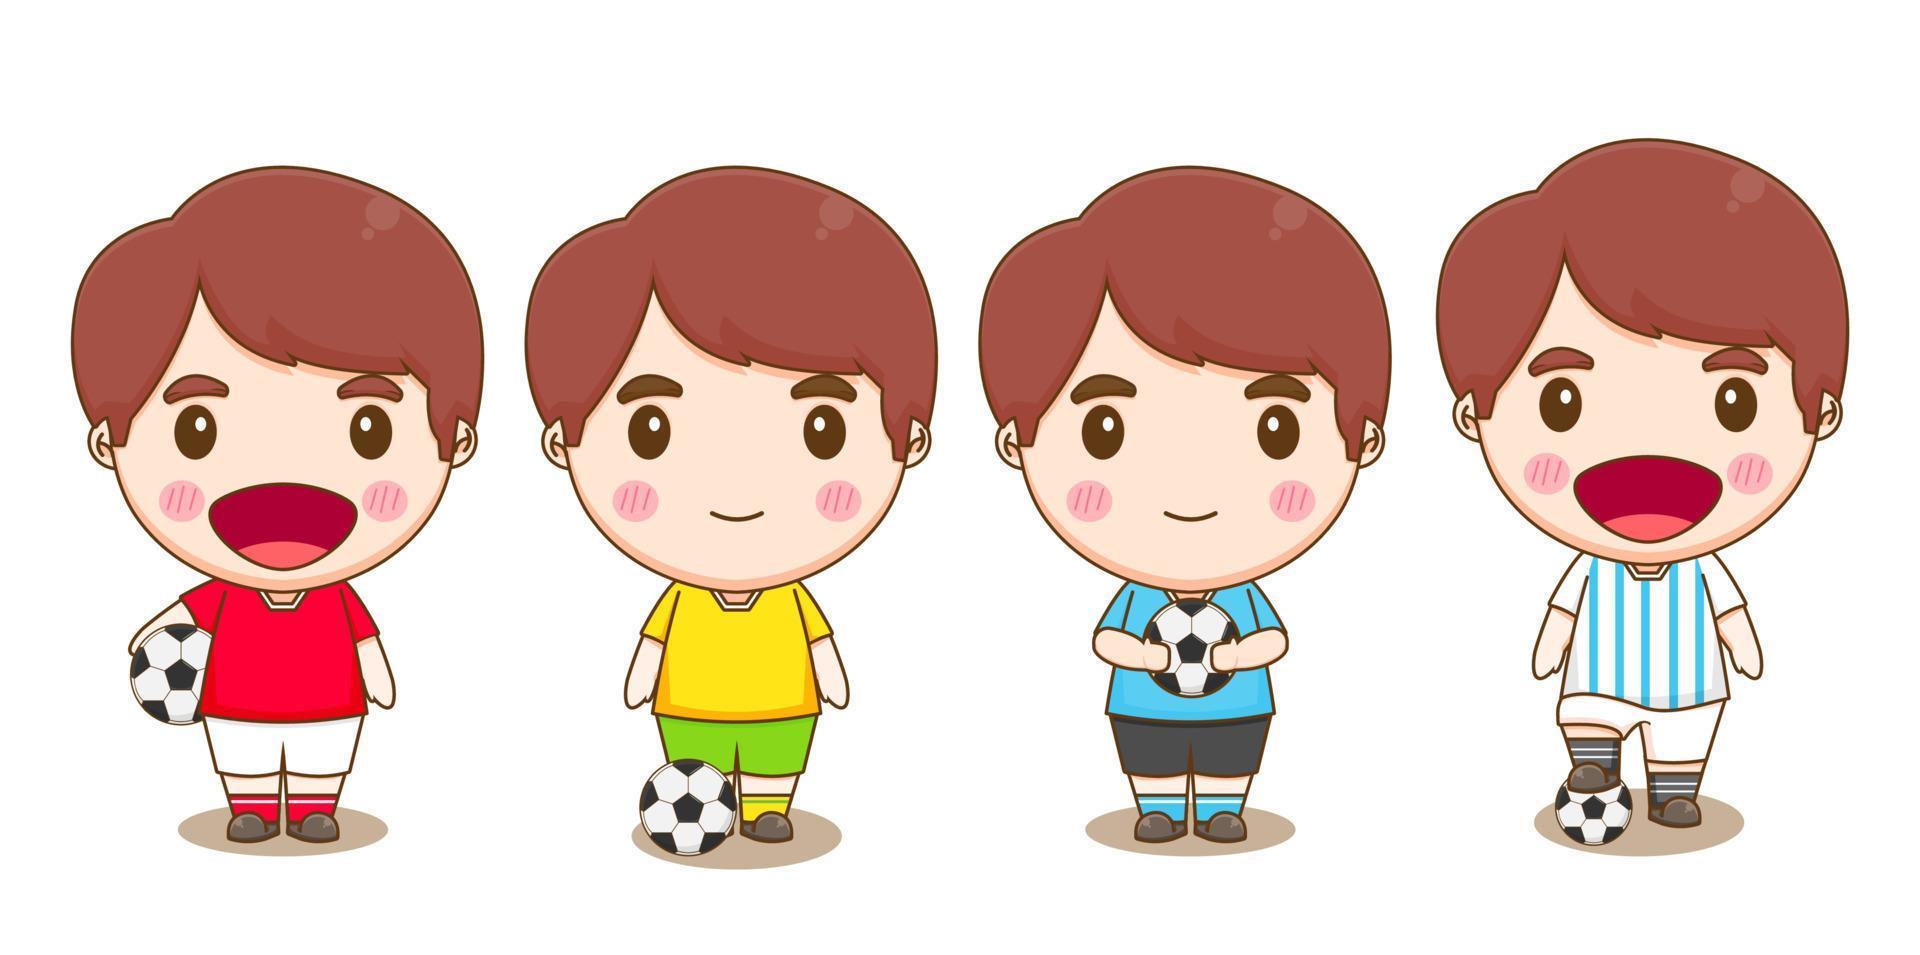 a group of cute football player chibi character illustration vector